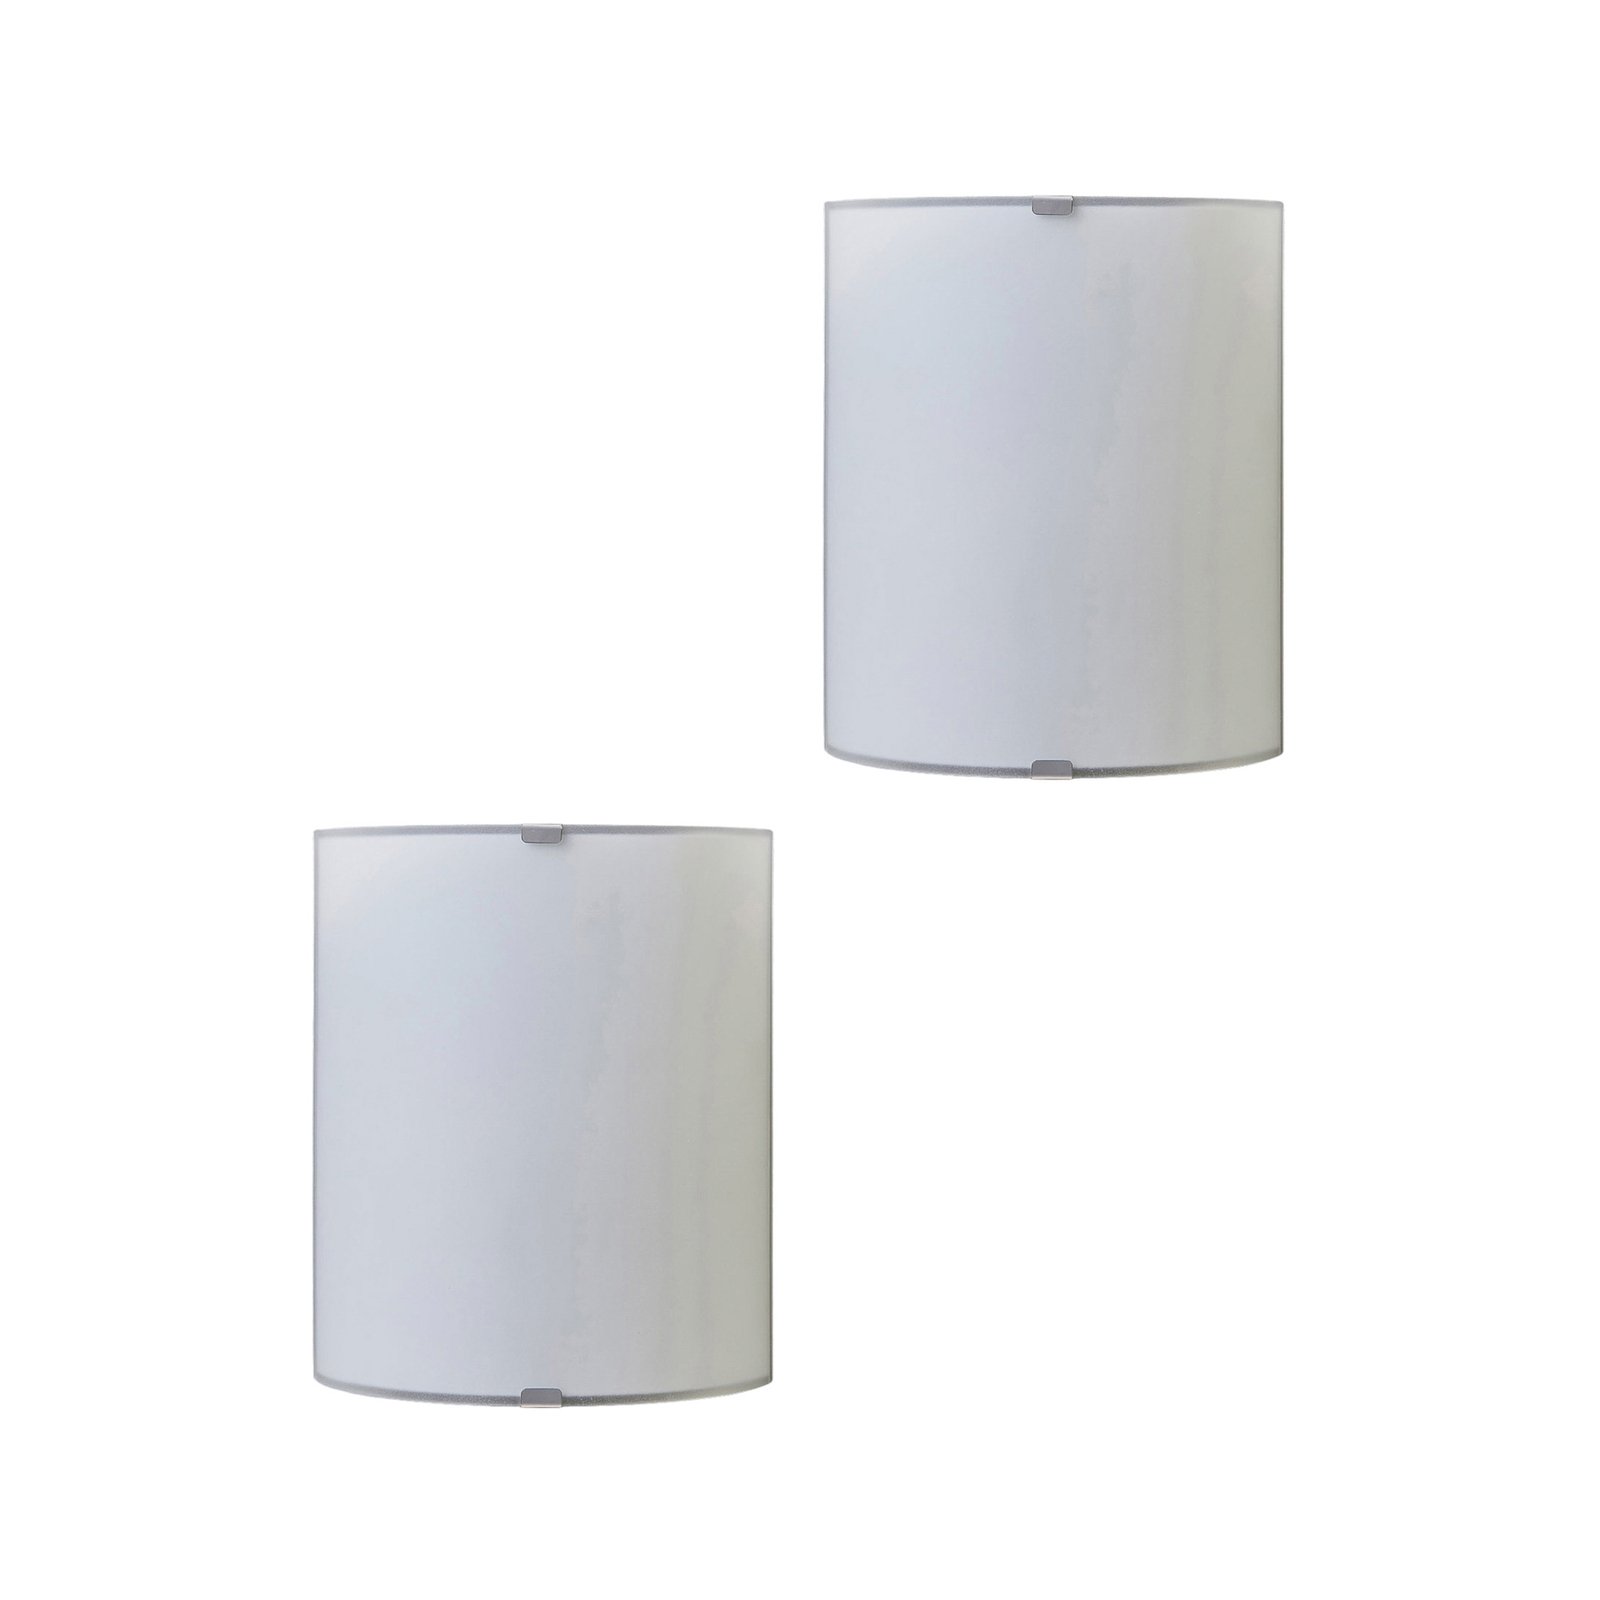 Phil simple glass wall light, set of 2